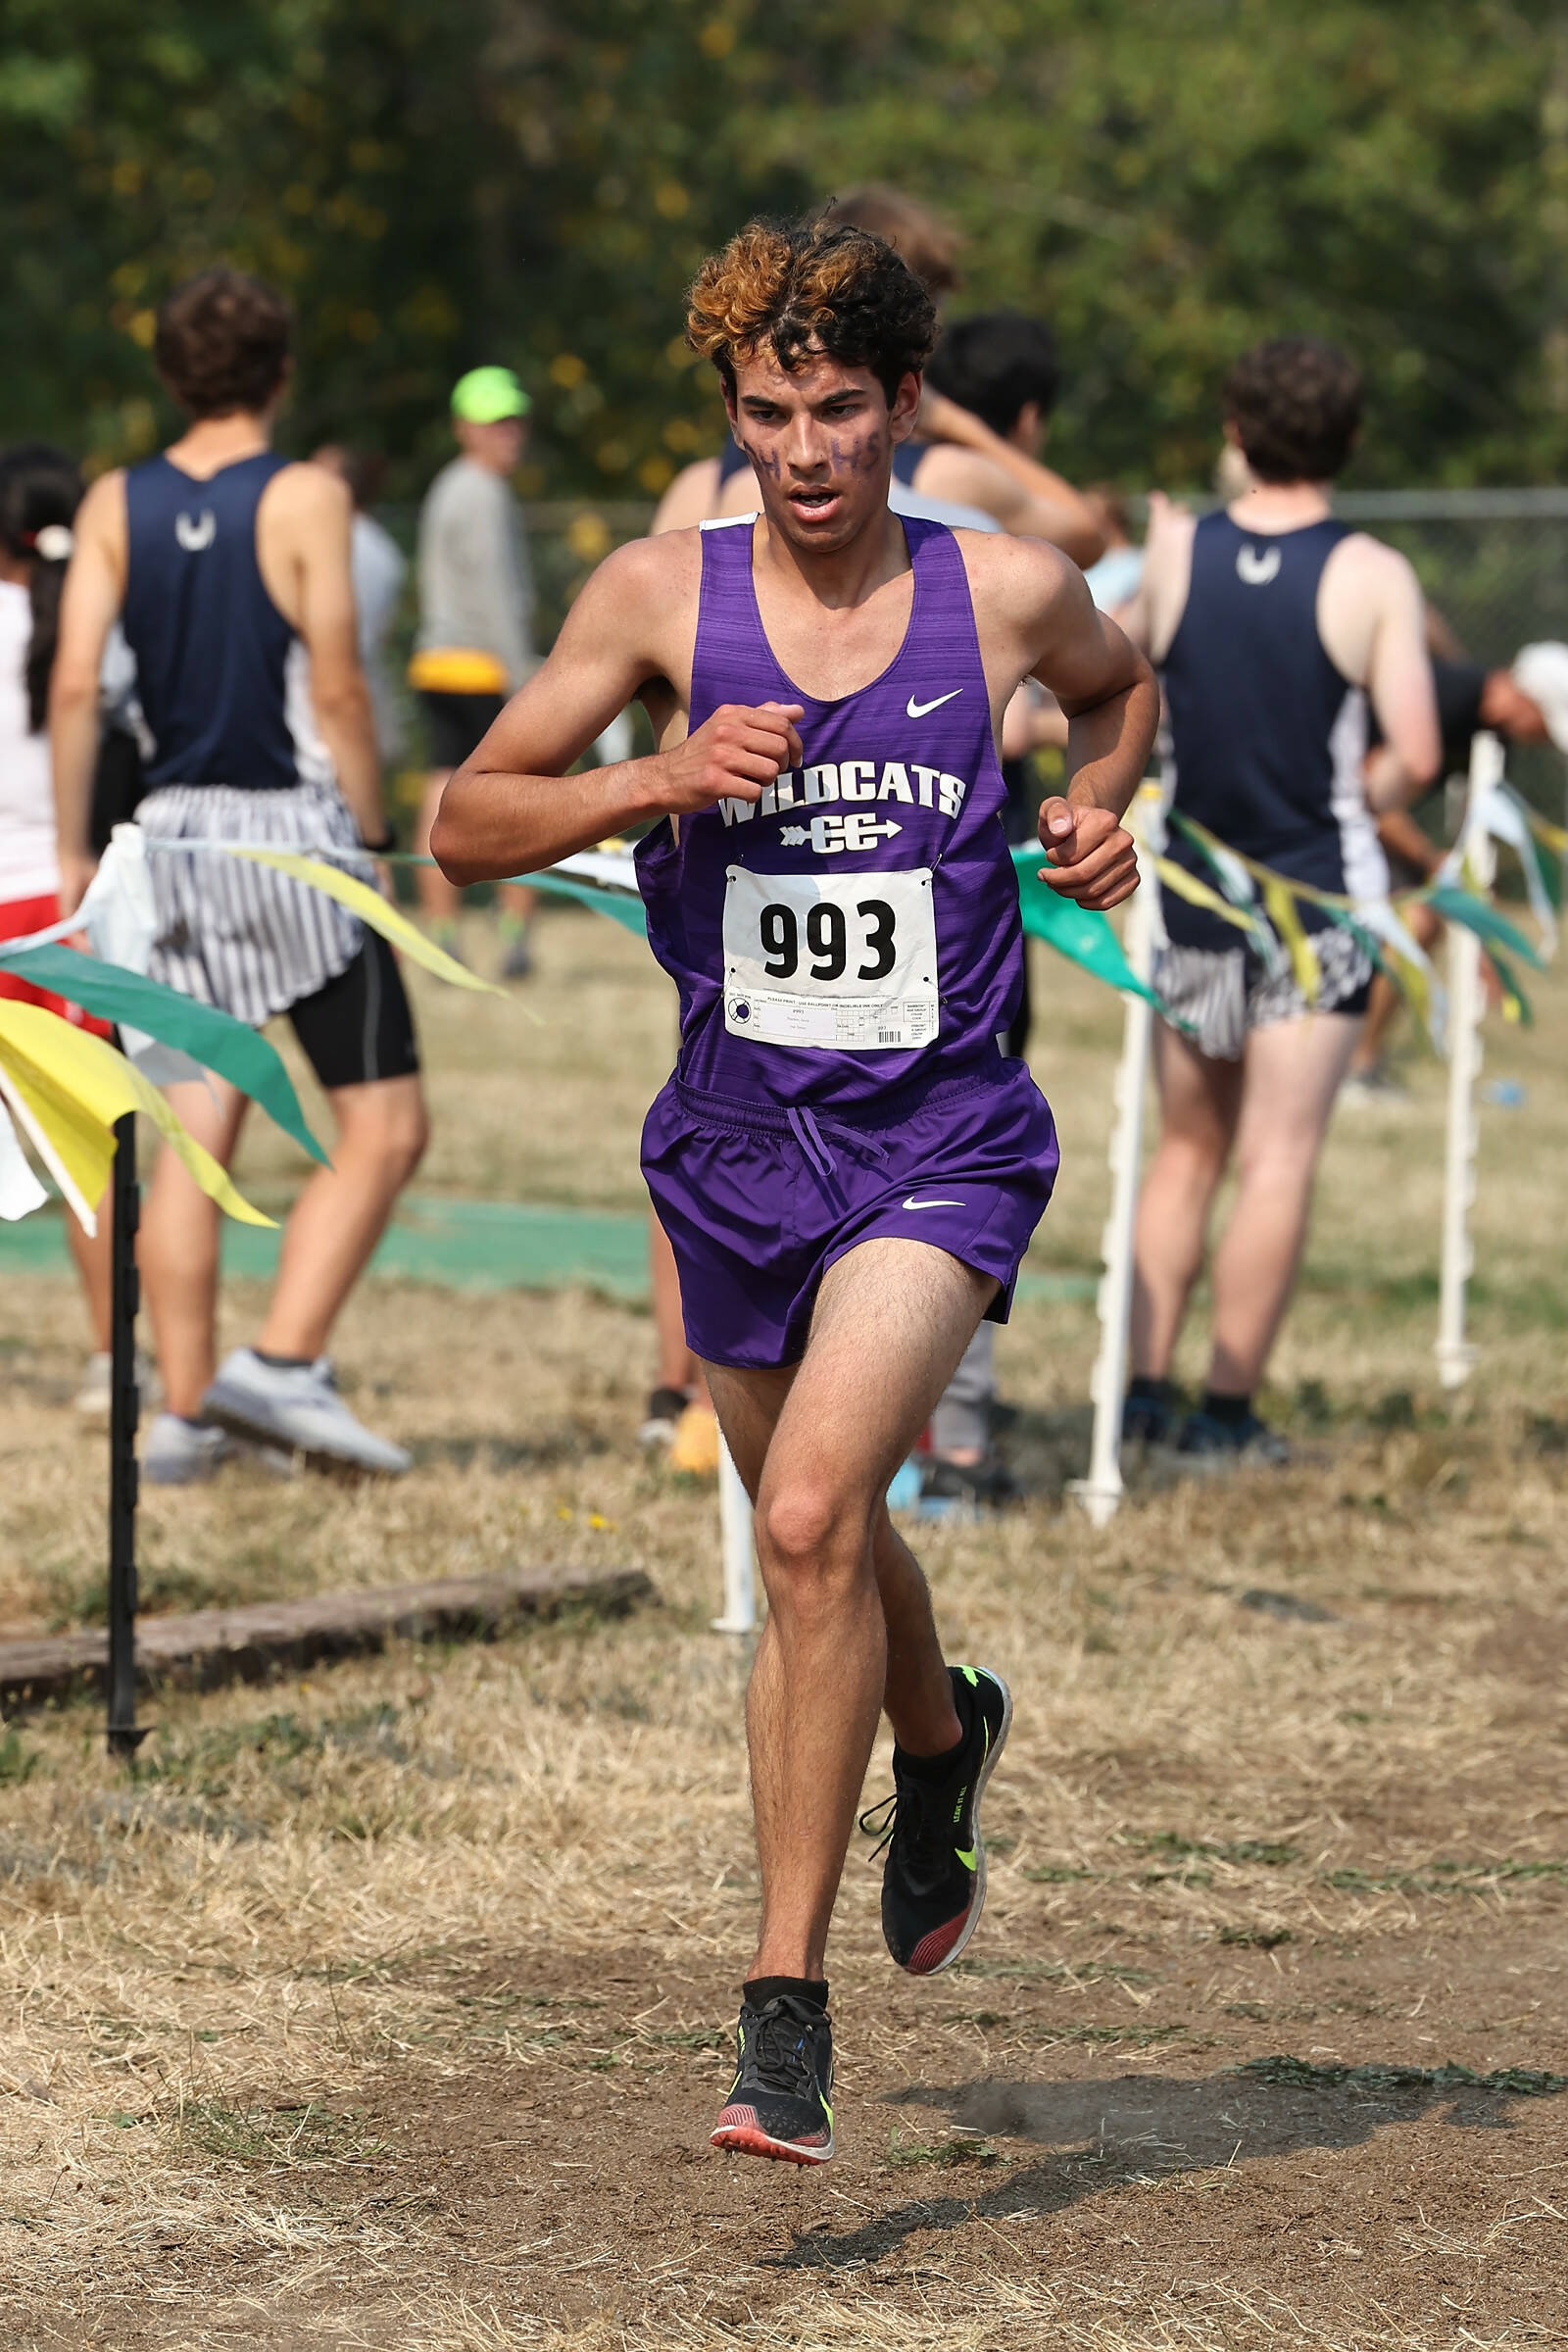 Photo by John Fisken
Oak Harbor High School runner Jacob Pearson finished eighth overall in the 2 Miles Senior boys cross country race on Sept. 10 at the Sehome Invite at Bellingham’s Civic Stadium. All three Whidbey Island schools participated. His time of 10:35.72.